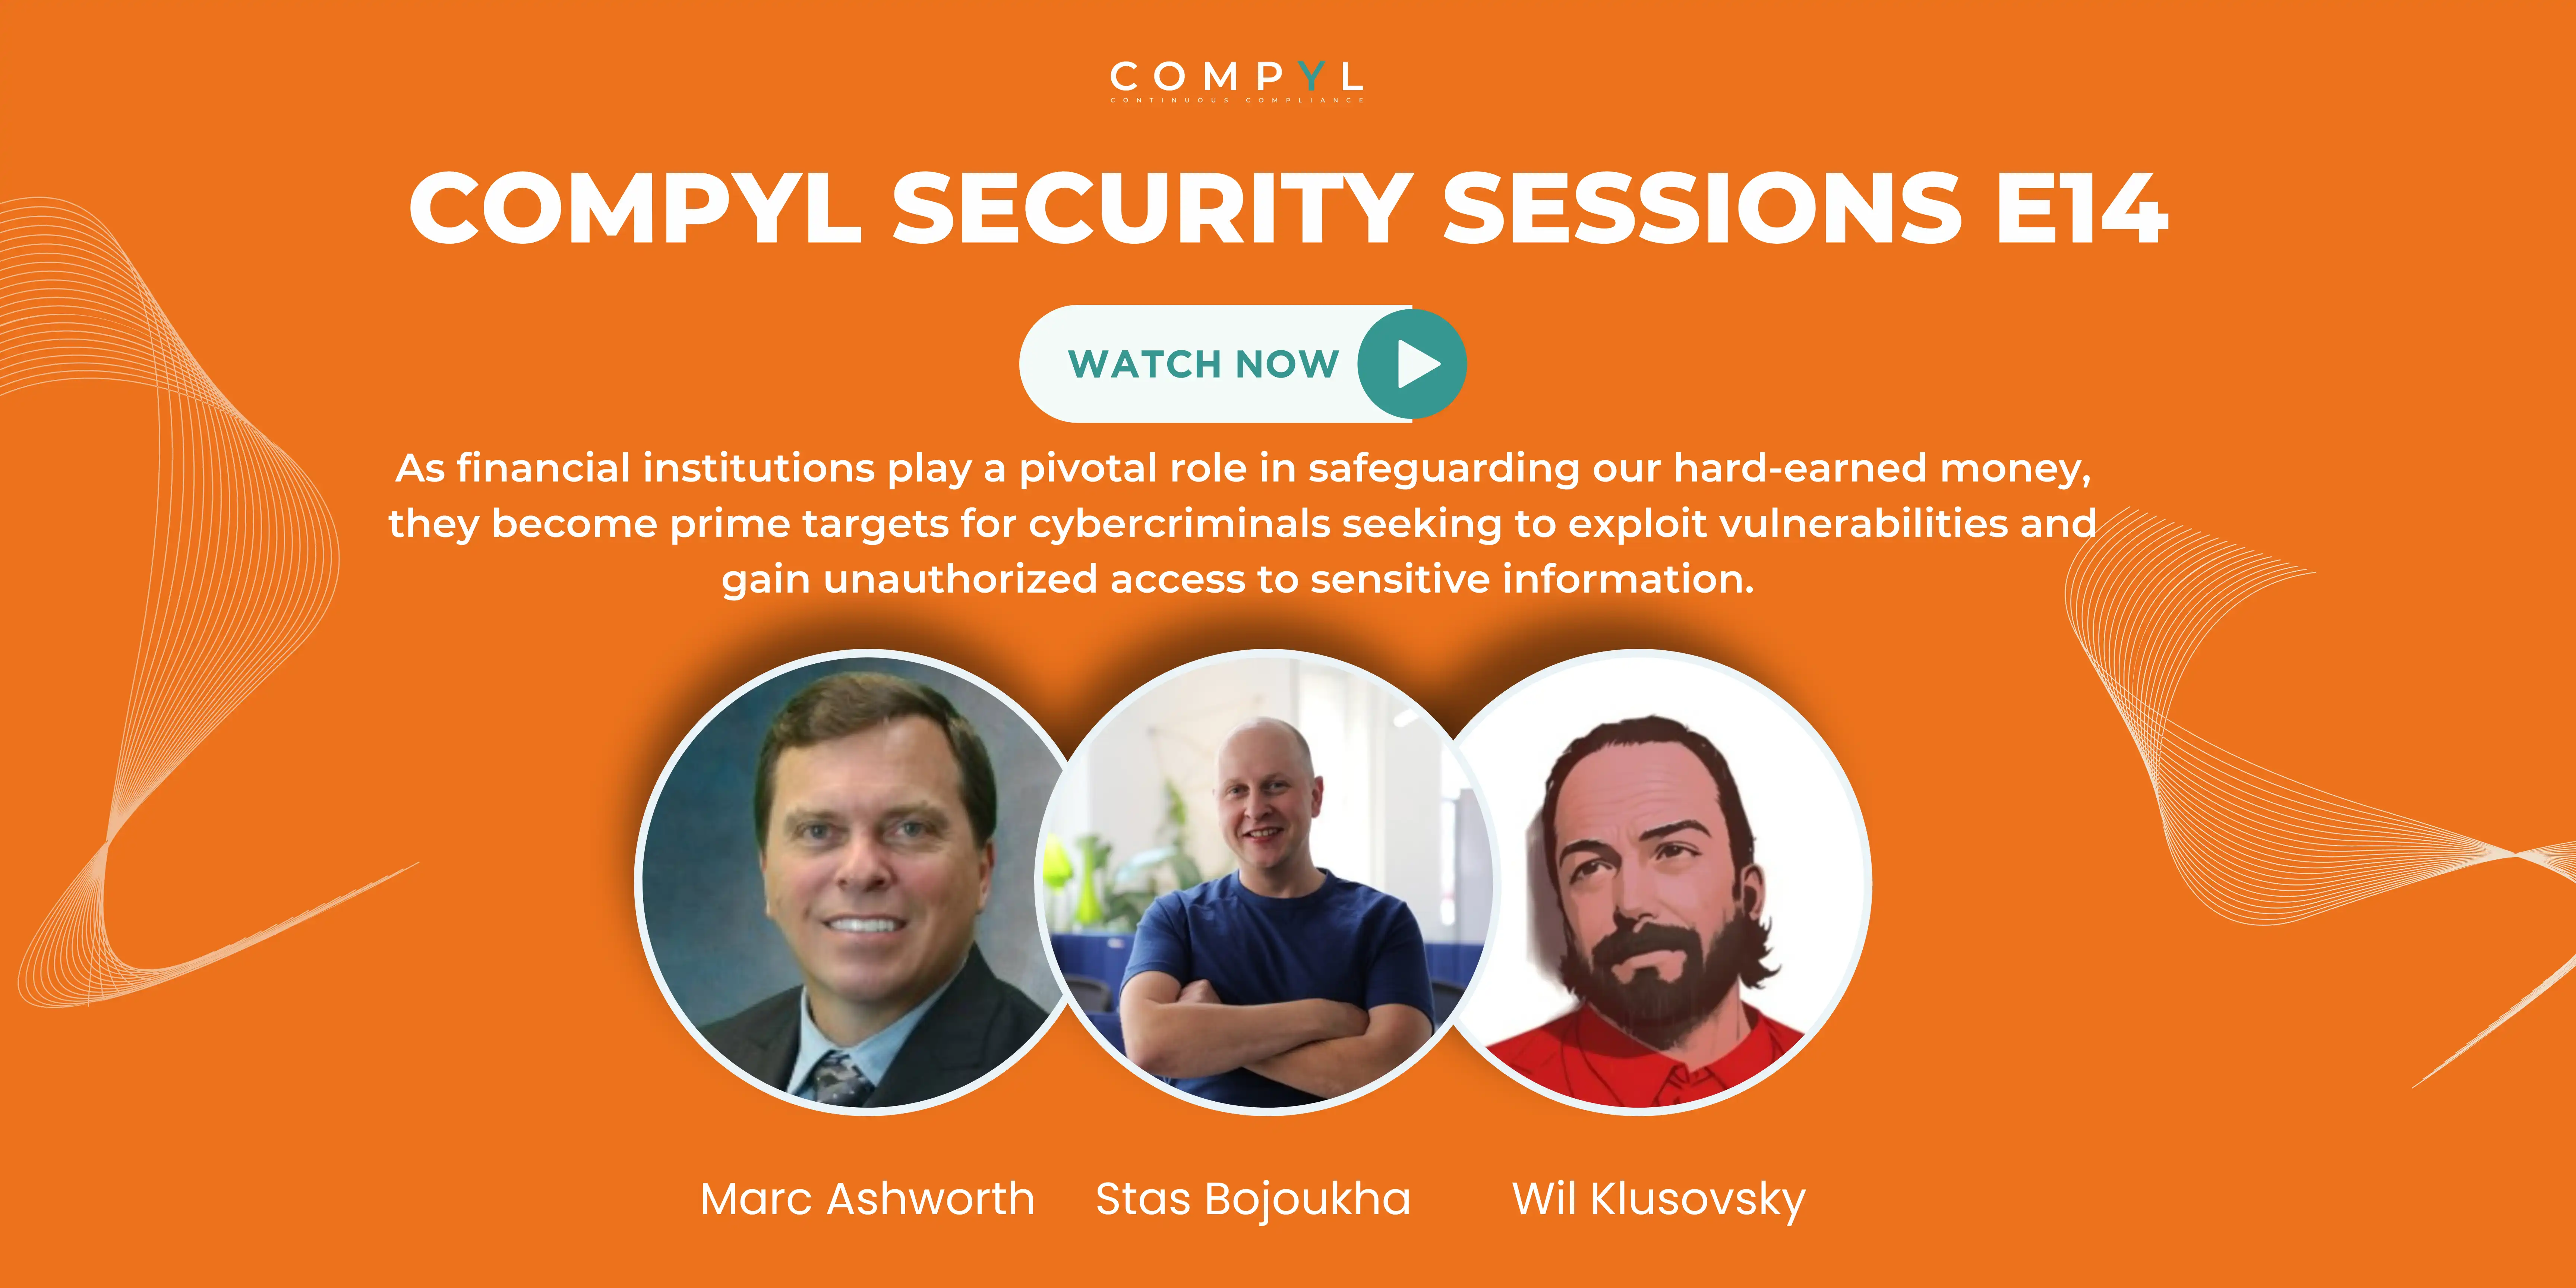 Compyl Security Sessions E14